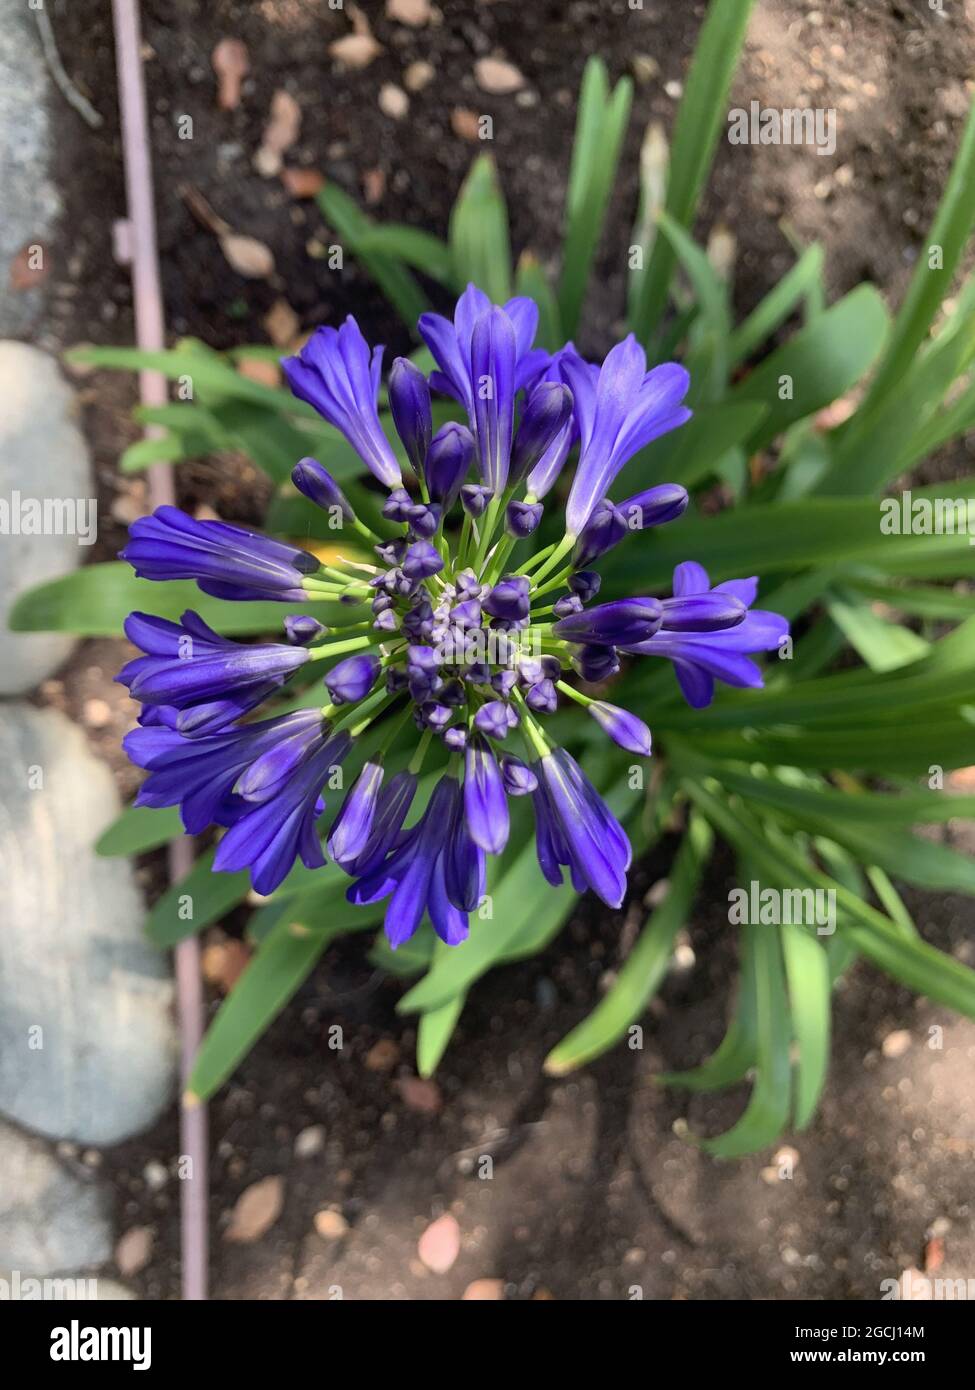 Closeup shot of an African lily in a garden on a blurred background Stock Photo